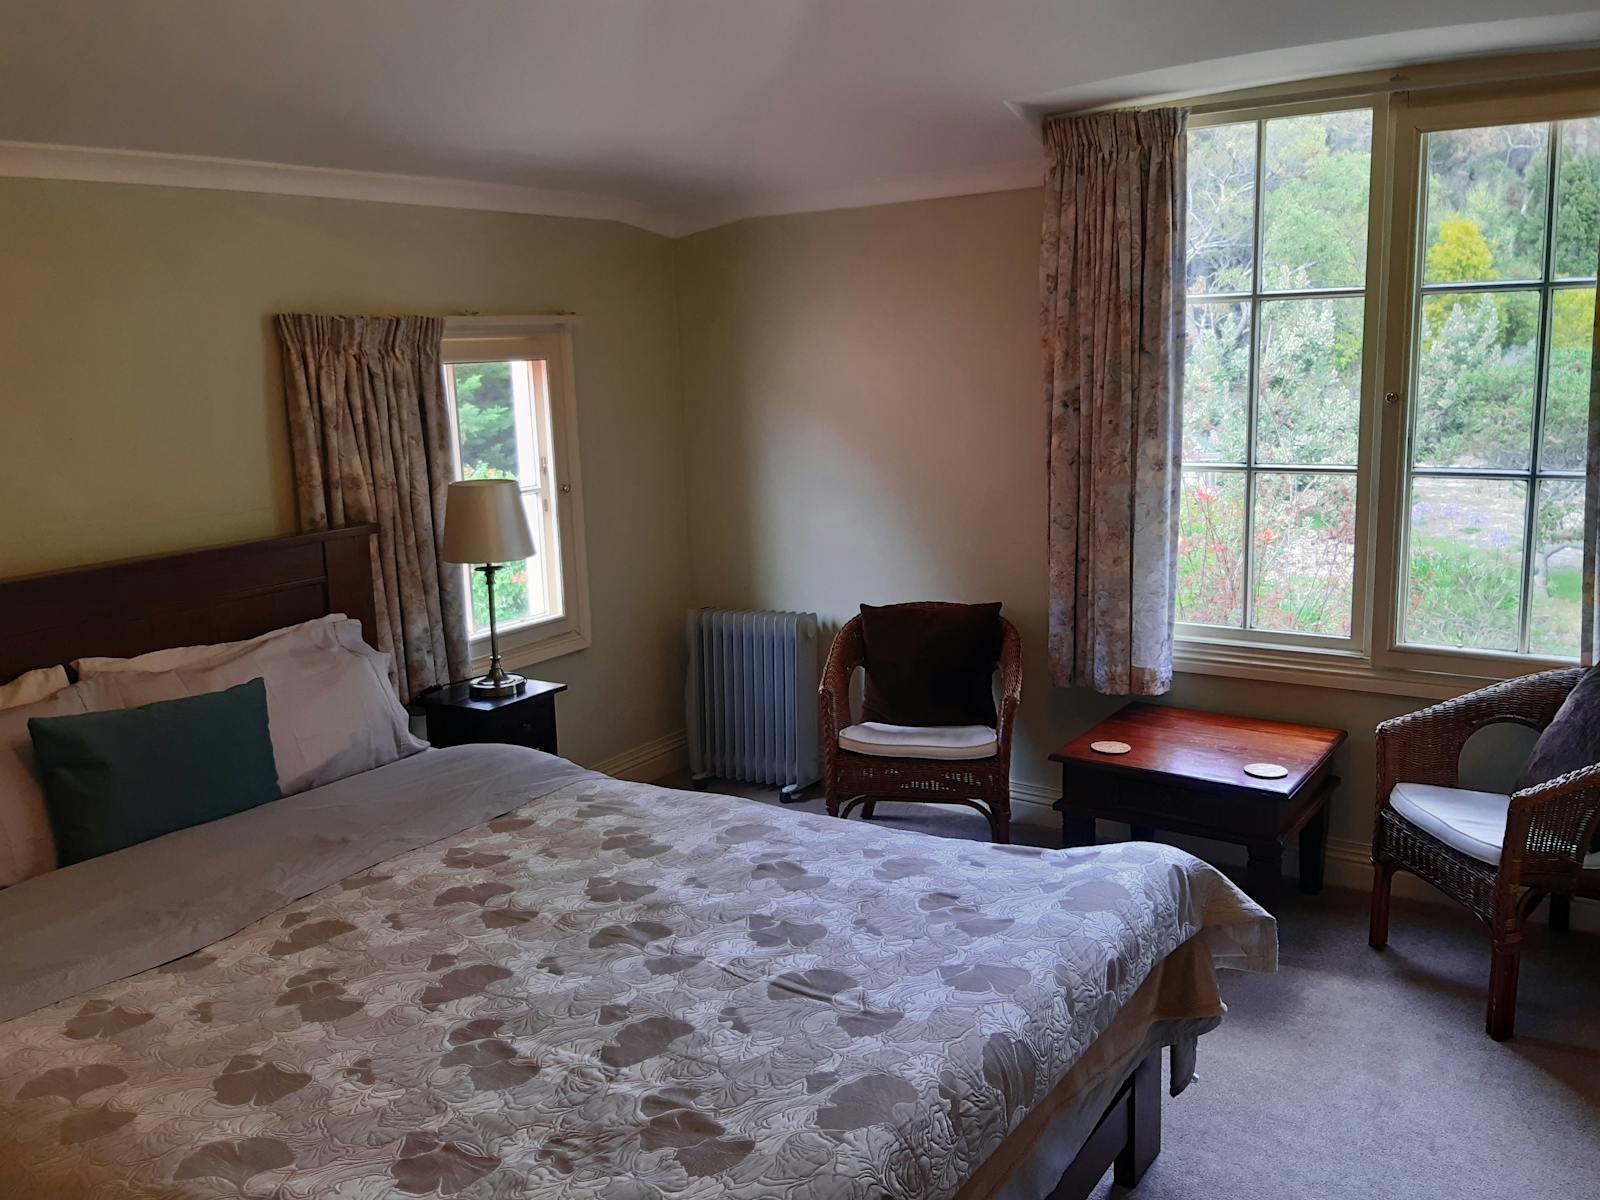 Double bed with ensuite, and comfortable chairs with coffee table